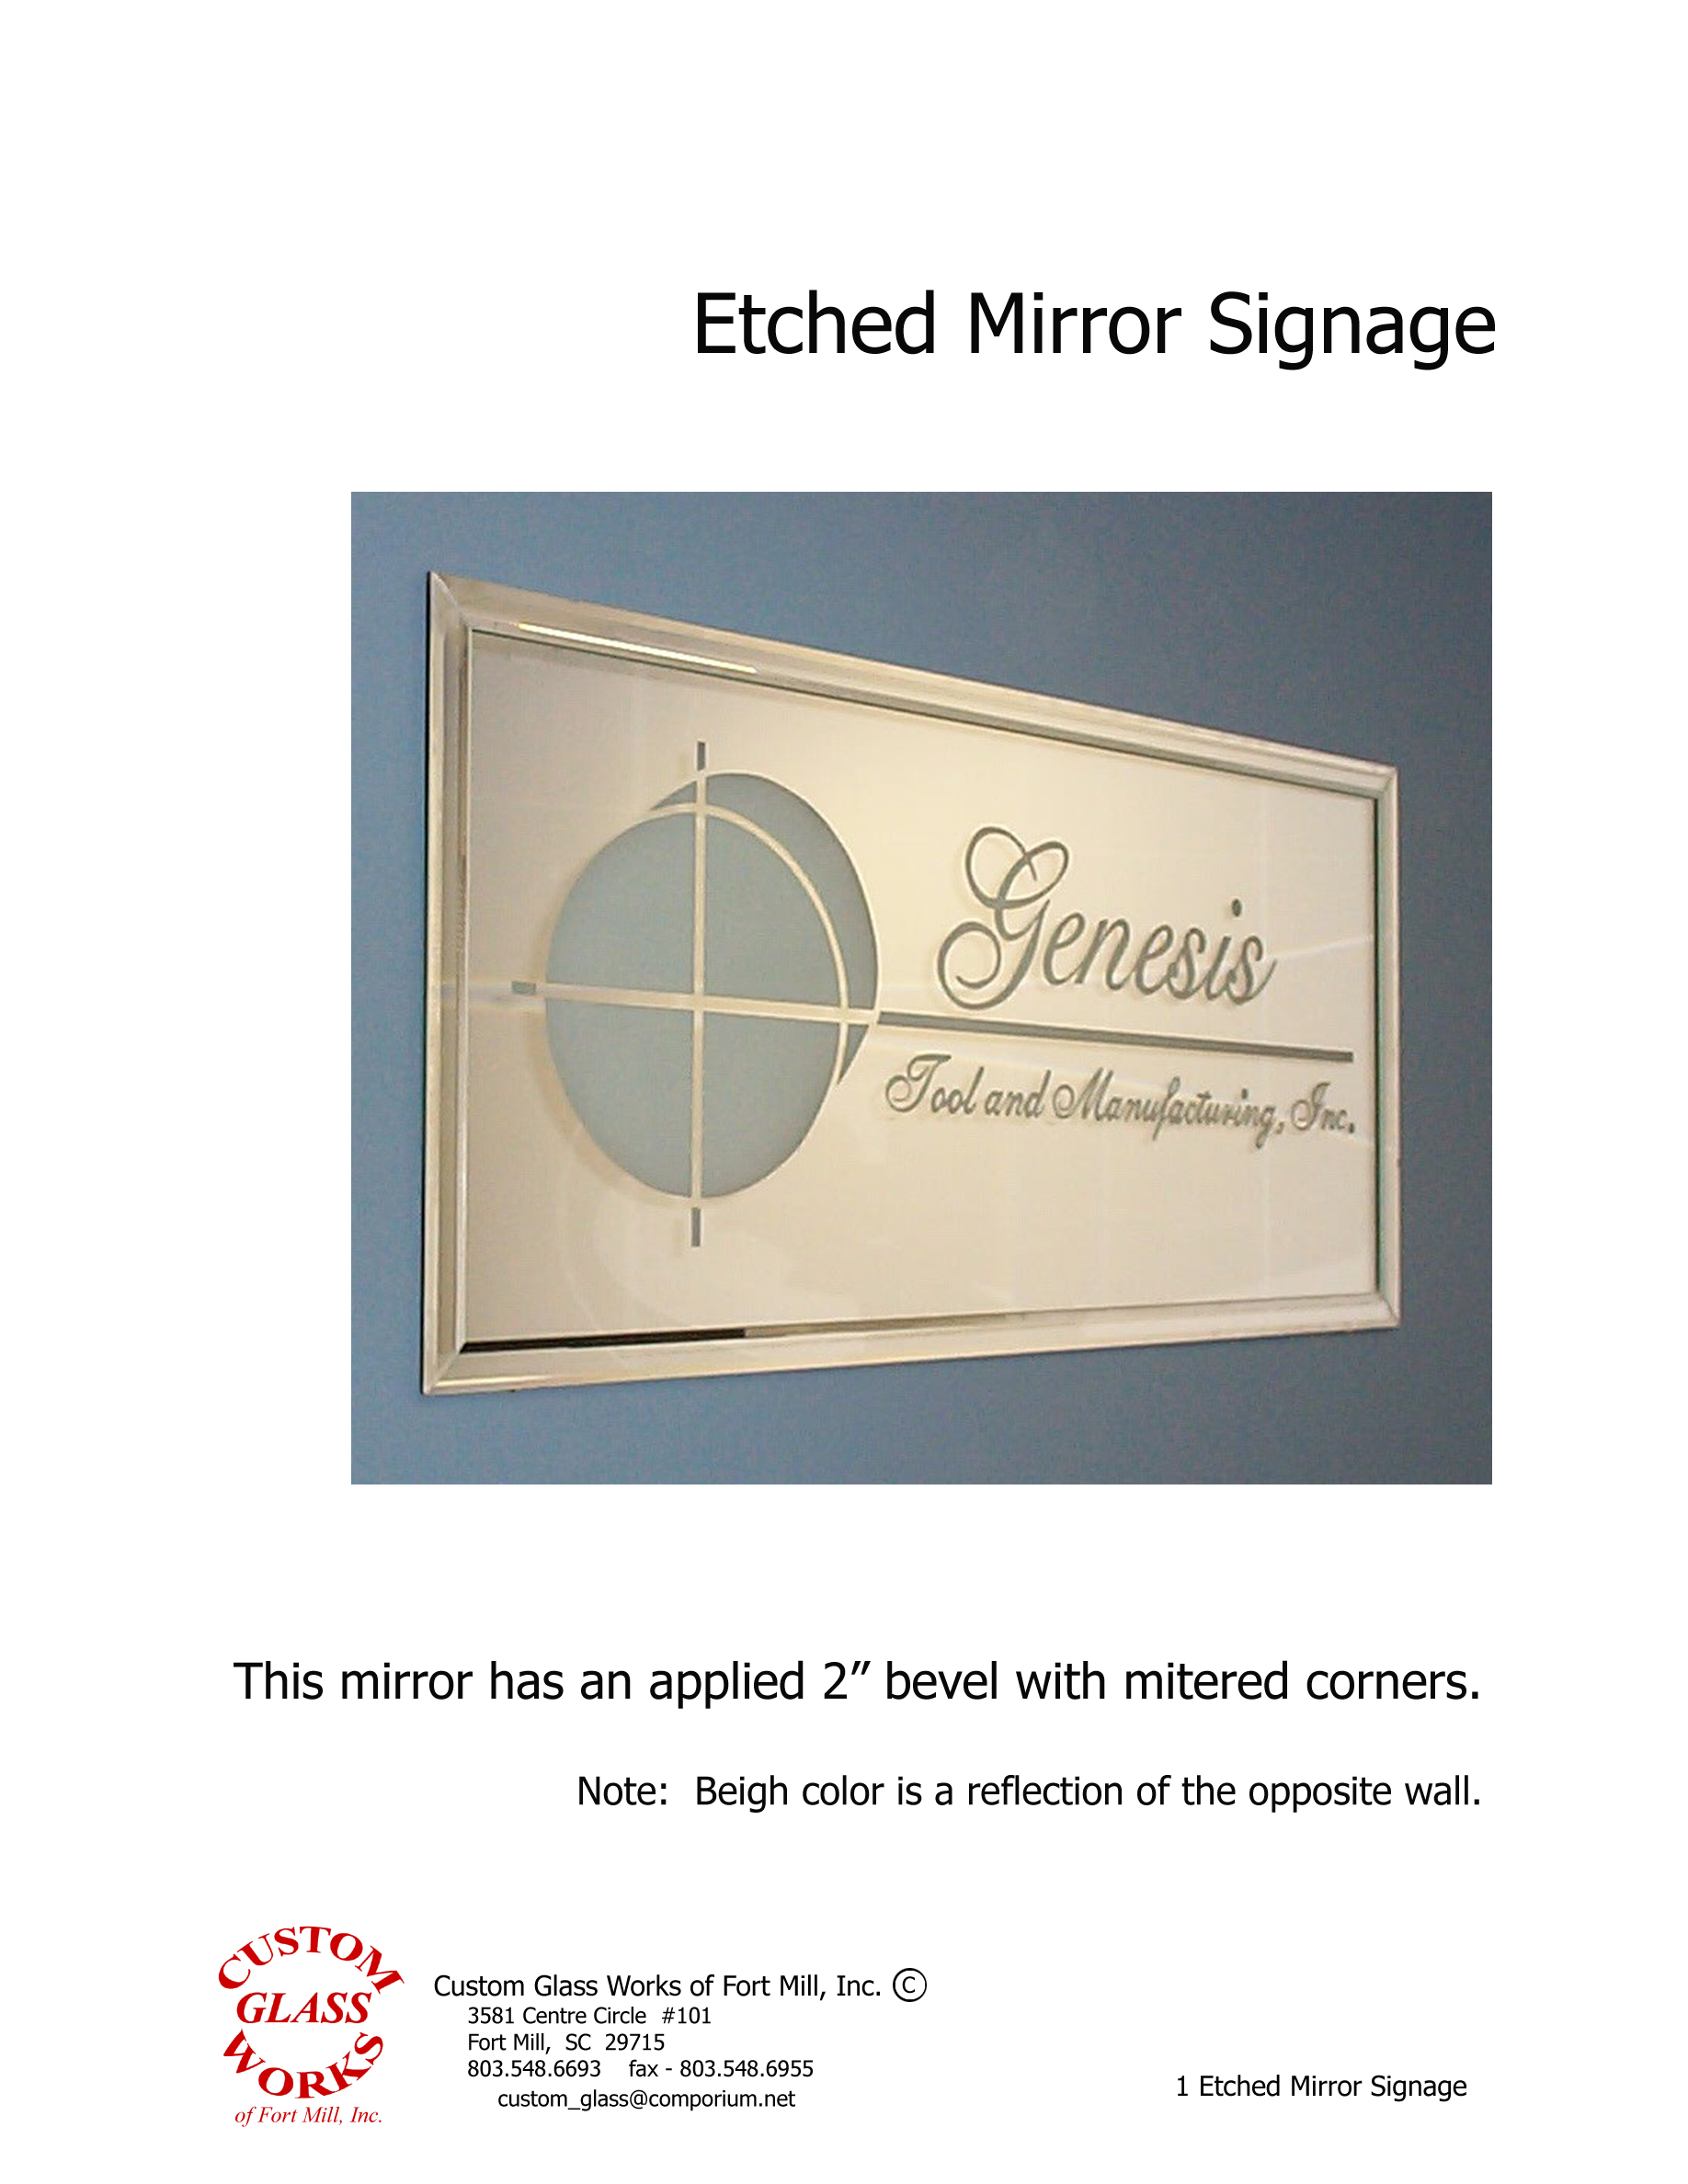 1 Etched Mirror Signage